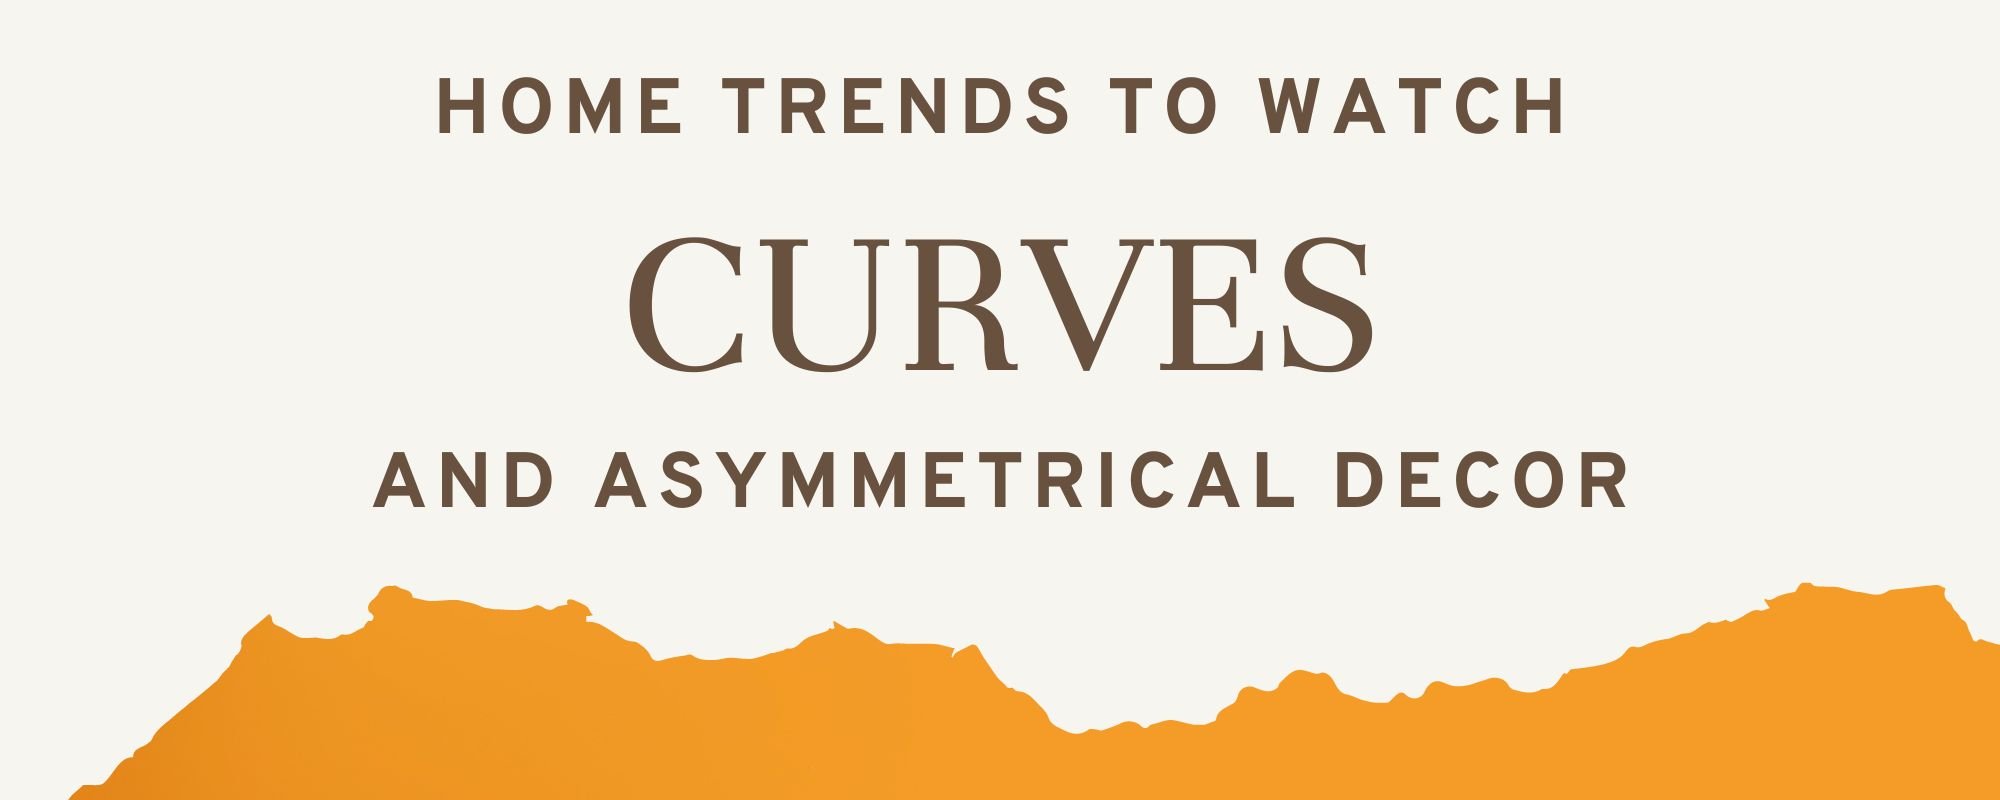 2023 Home Trends to Watch - Curves and Asymmetrical Decor Header